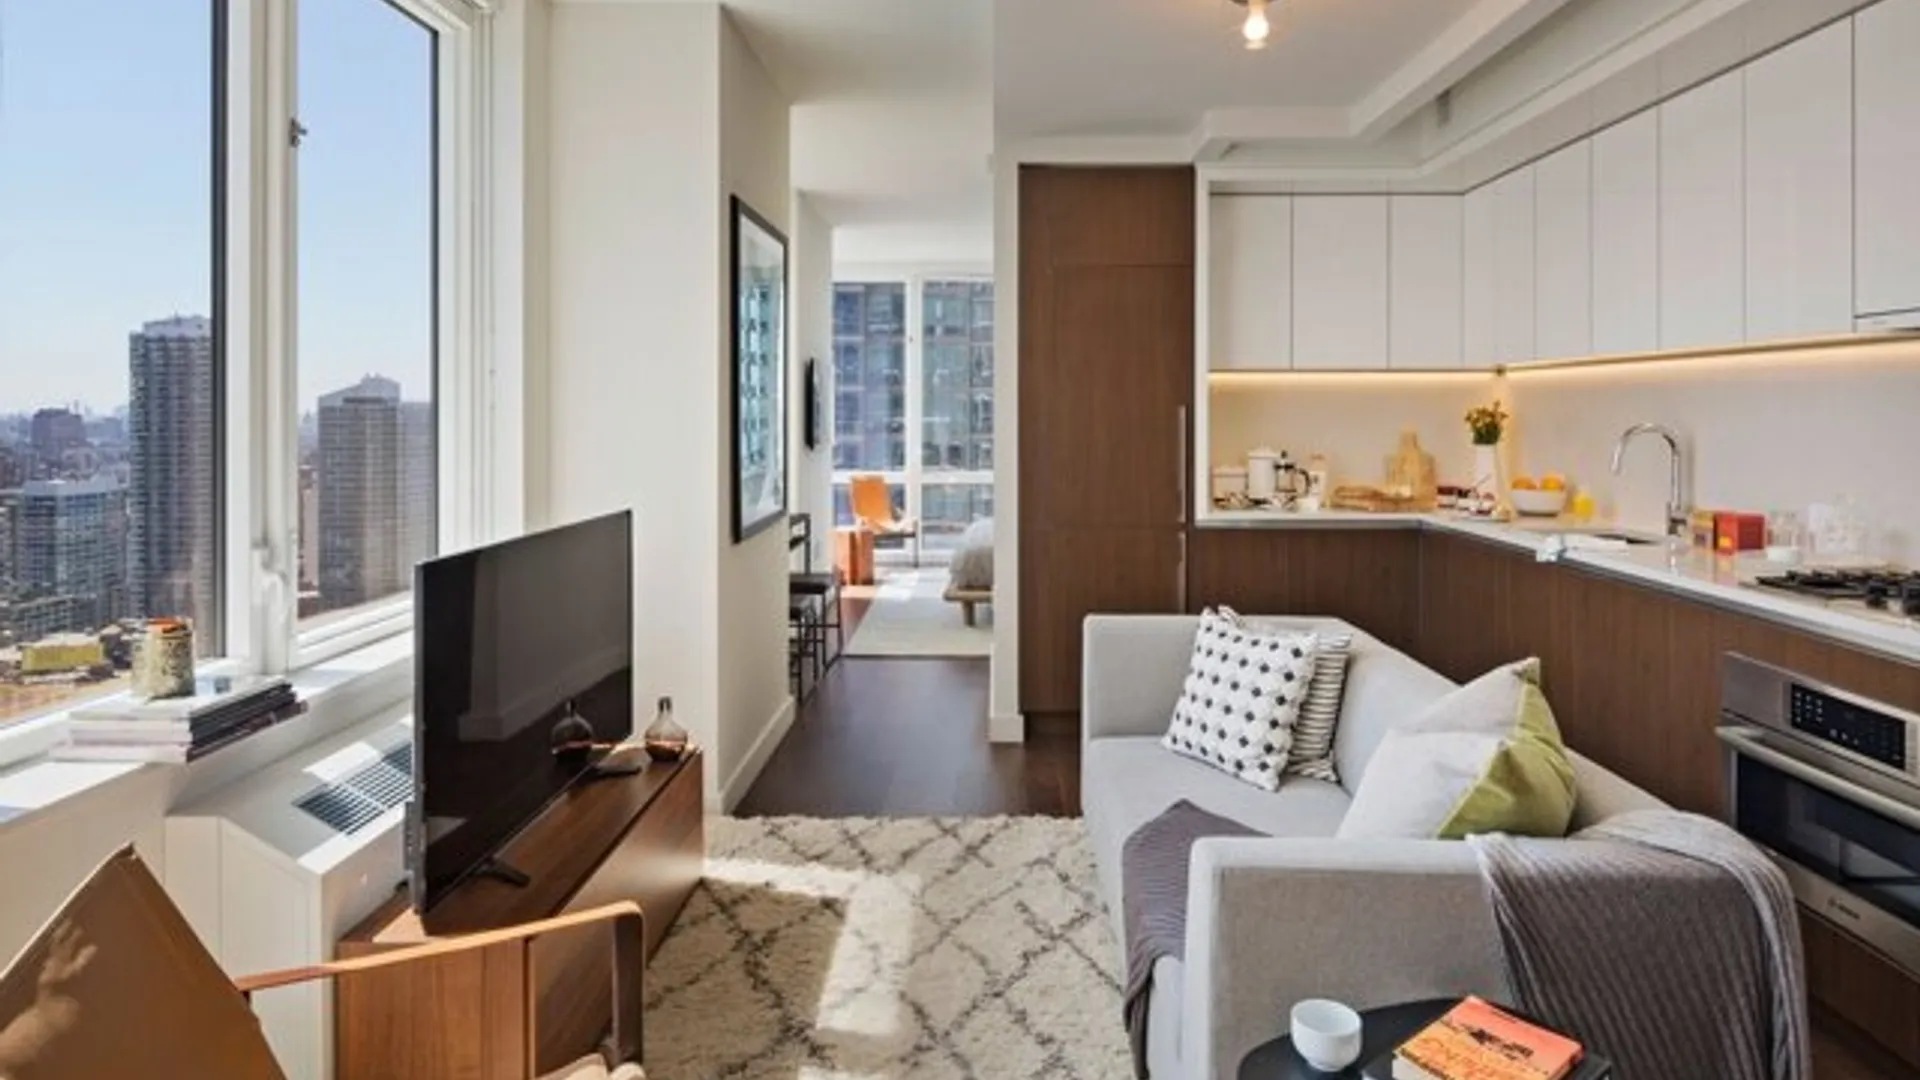 Sky- Luxury Apartments, West 43rd Street, New York, NY 10036, USA | Studio apartment for rent